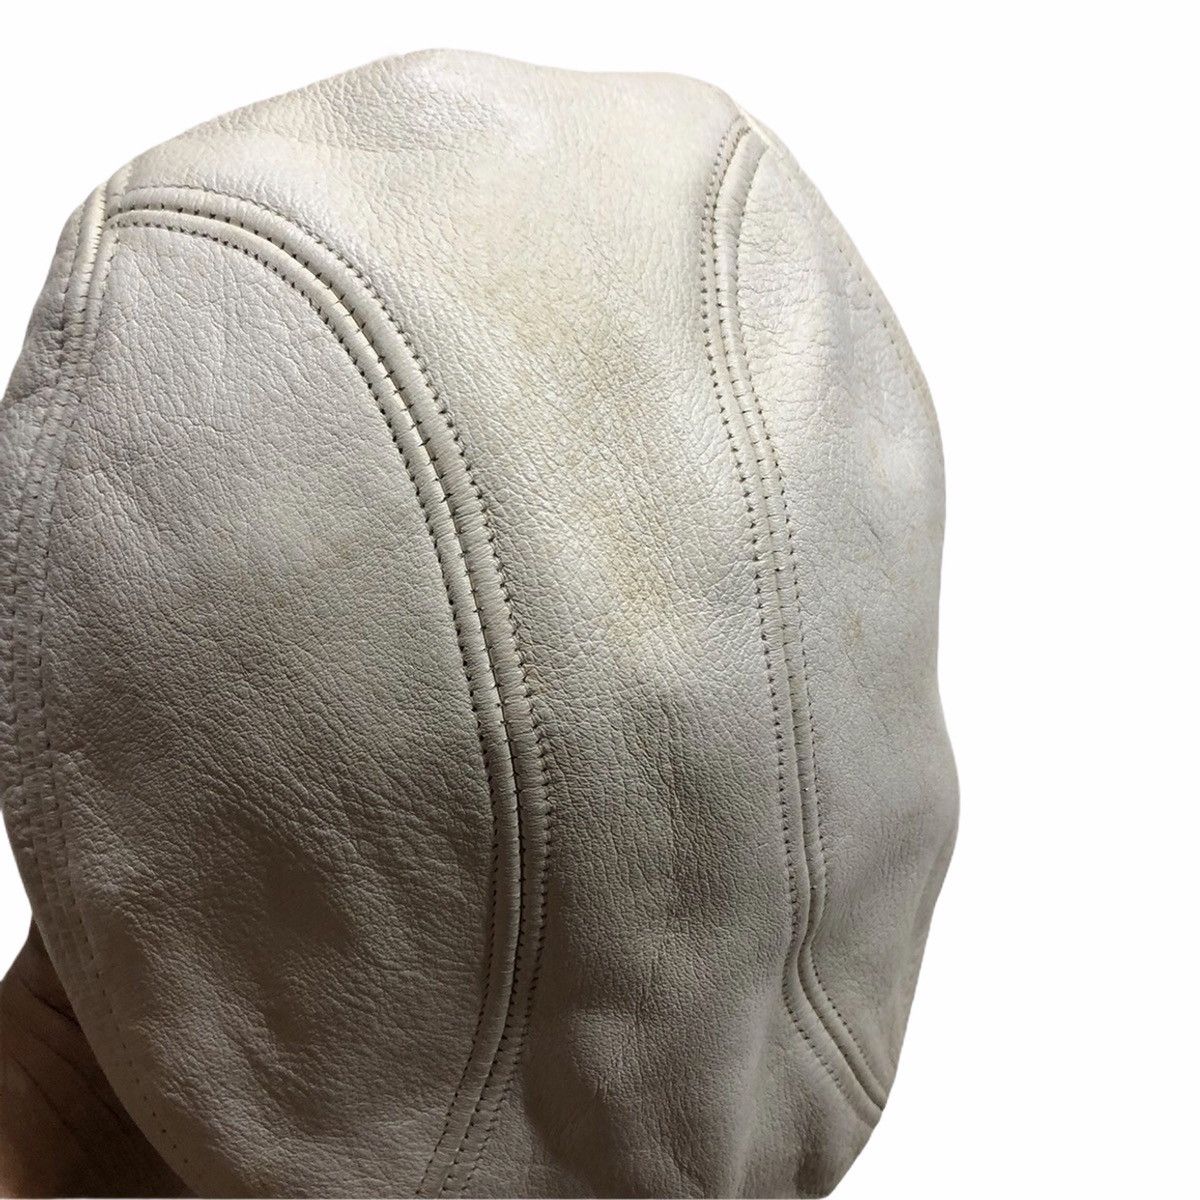 Vintage New York Hat Co. Beret Hat, White Leather Hats Caps Size ONE SIZE - 6 Thumbnail